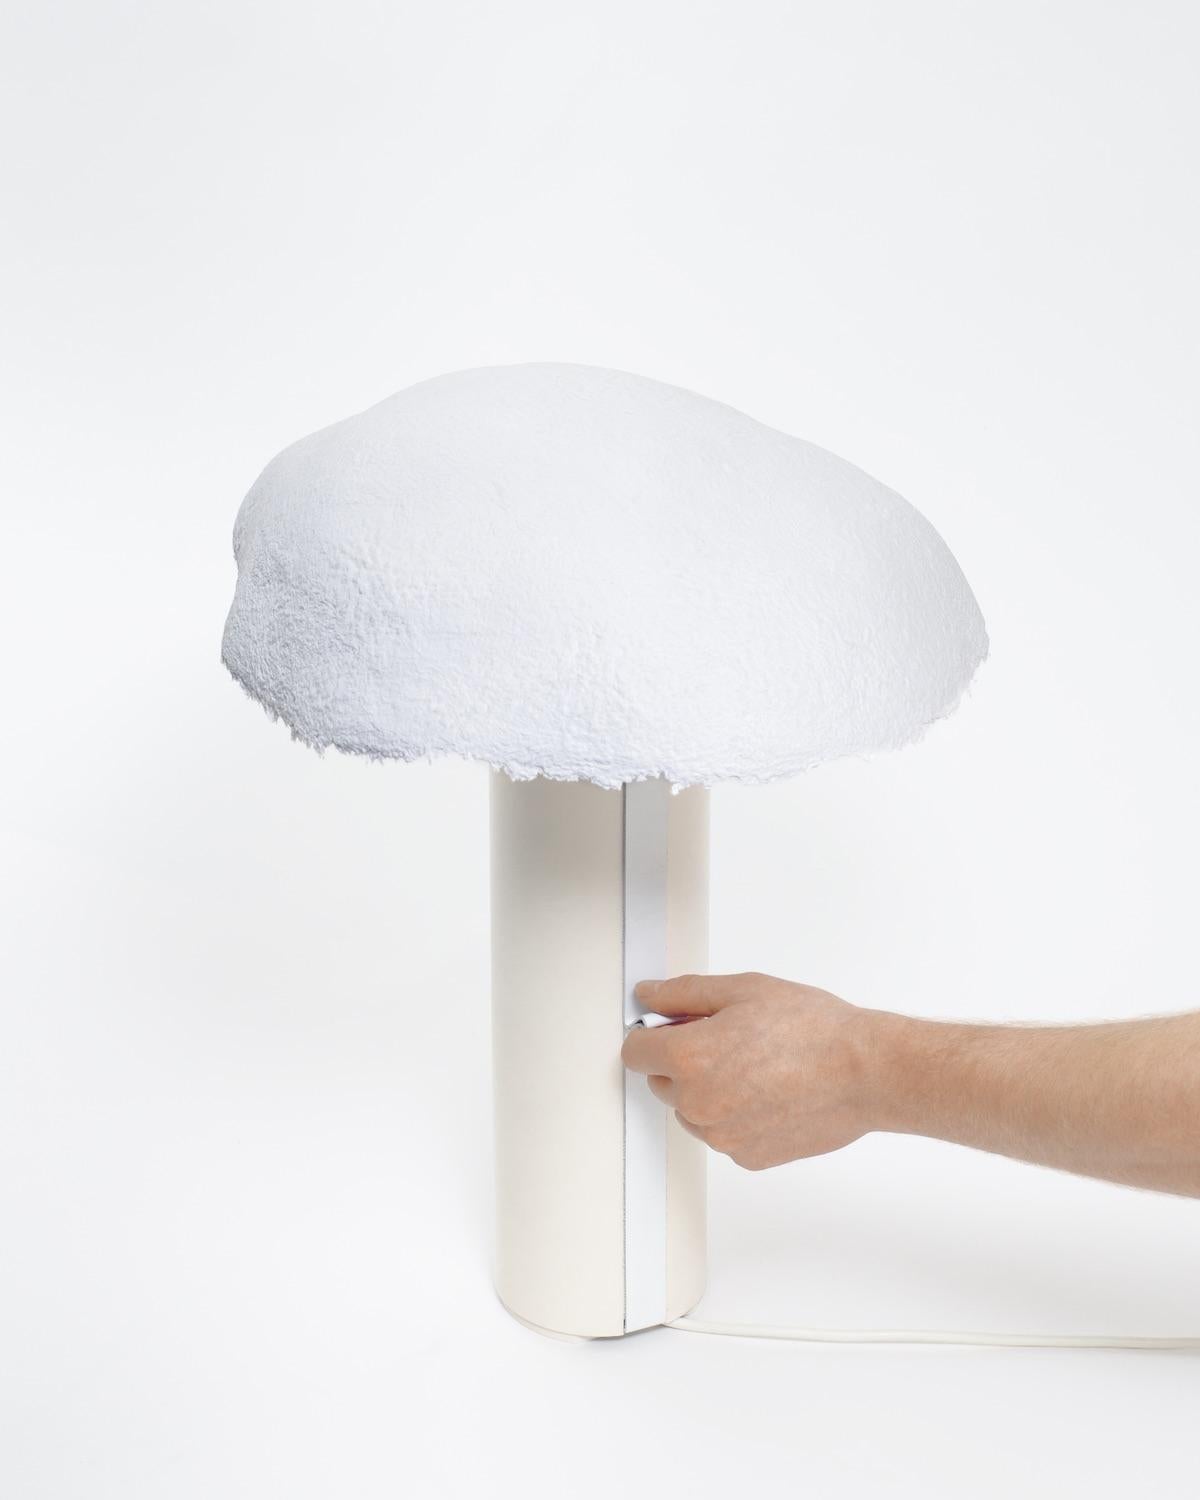 The overcast light consists of an aluminum cylindrical base and a paper shade. The shade is Handmade from blended paper pulp that allows light to shine through mimicking the effect of the sun obscured by cloud cover. Every shade's lower rough hewn